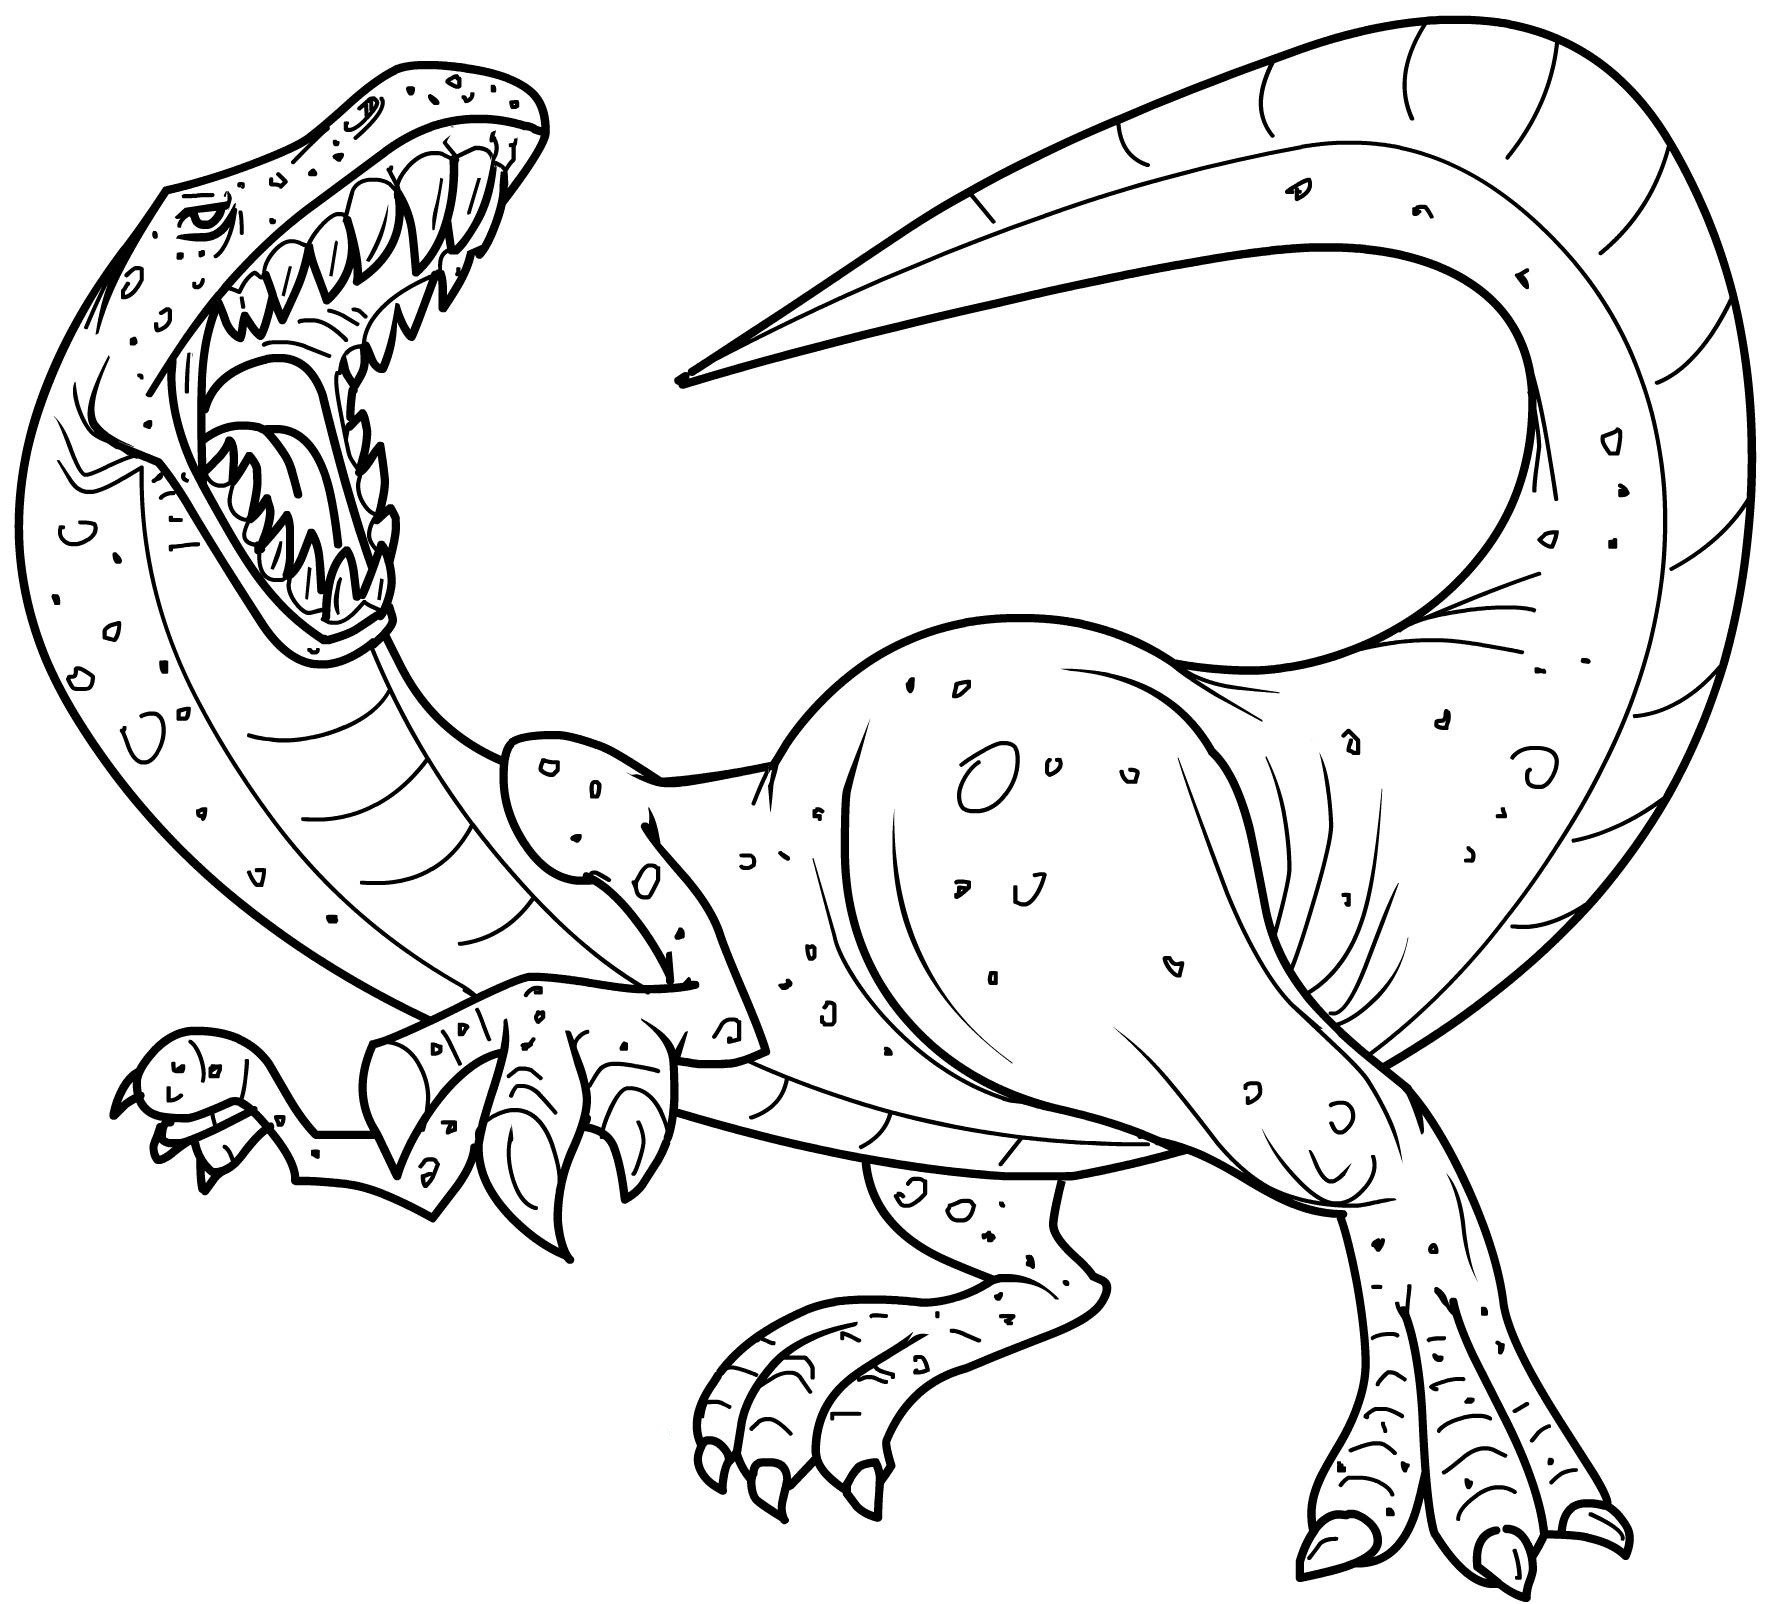 Dinosaur Coloring Pages For Adults
 Free Printable Dinosaur Coloring Pages For Kids